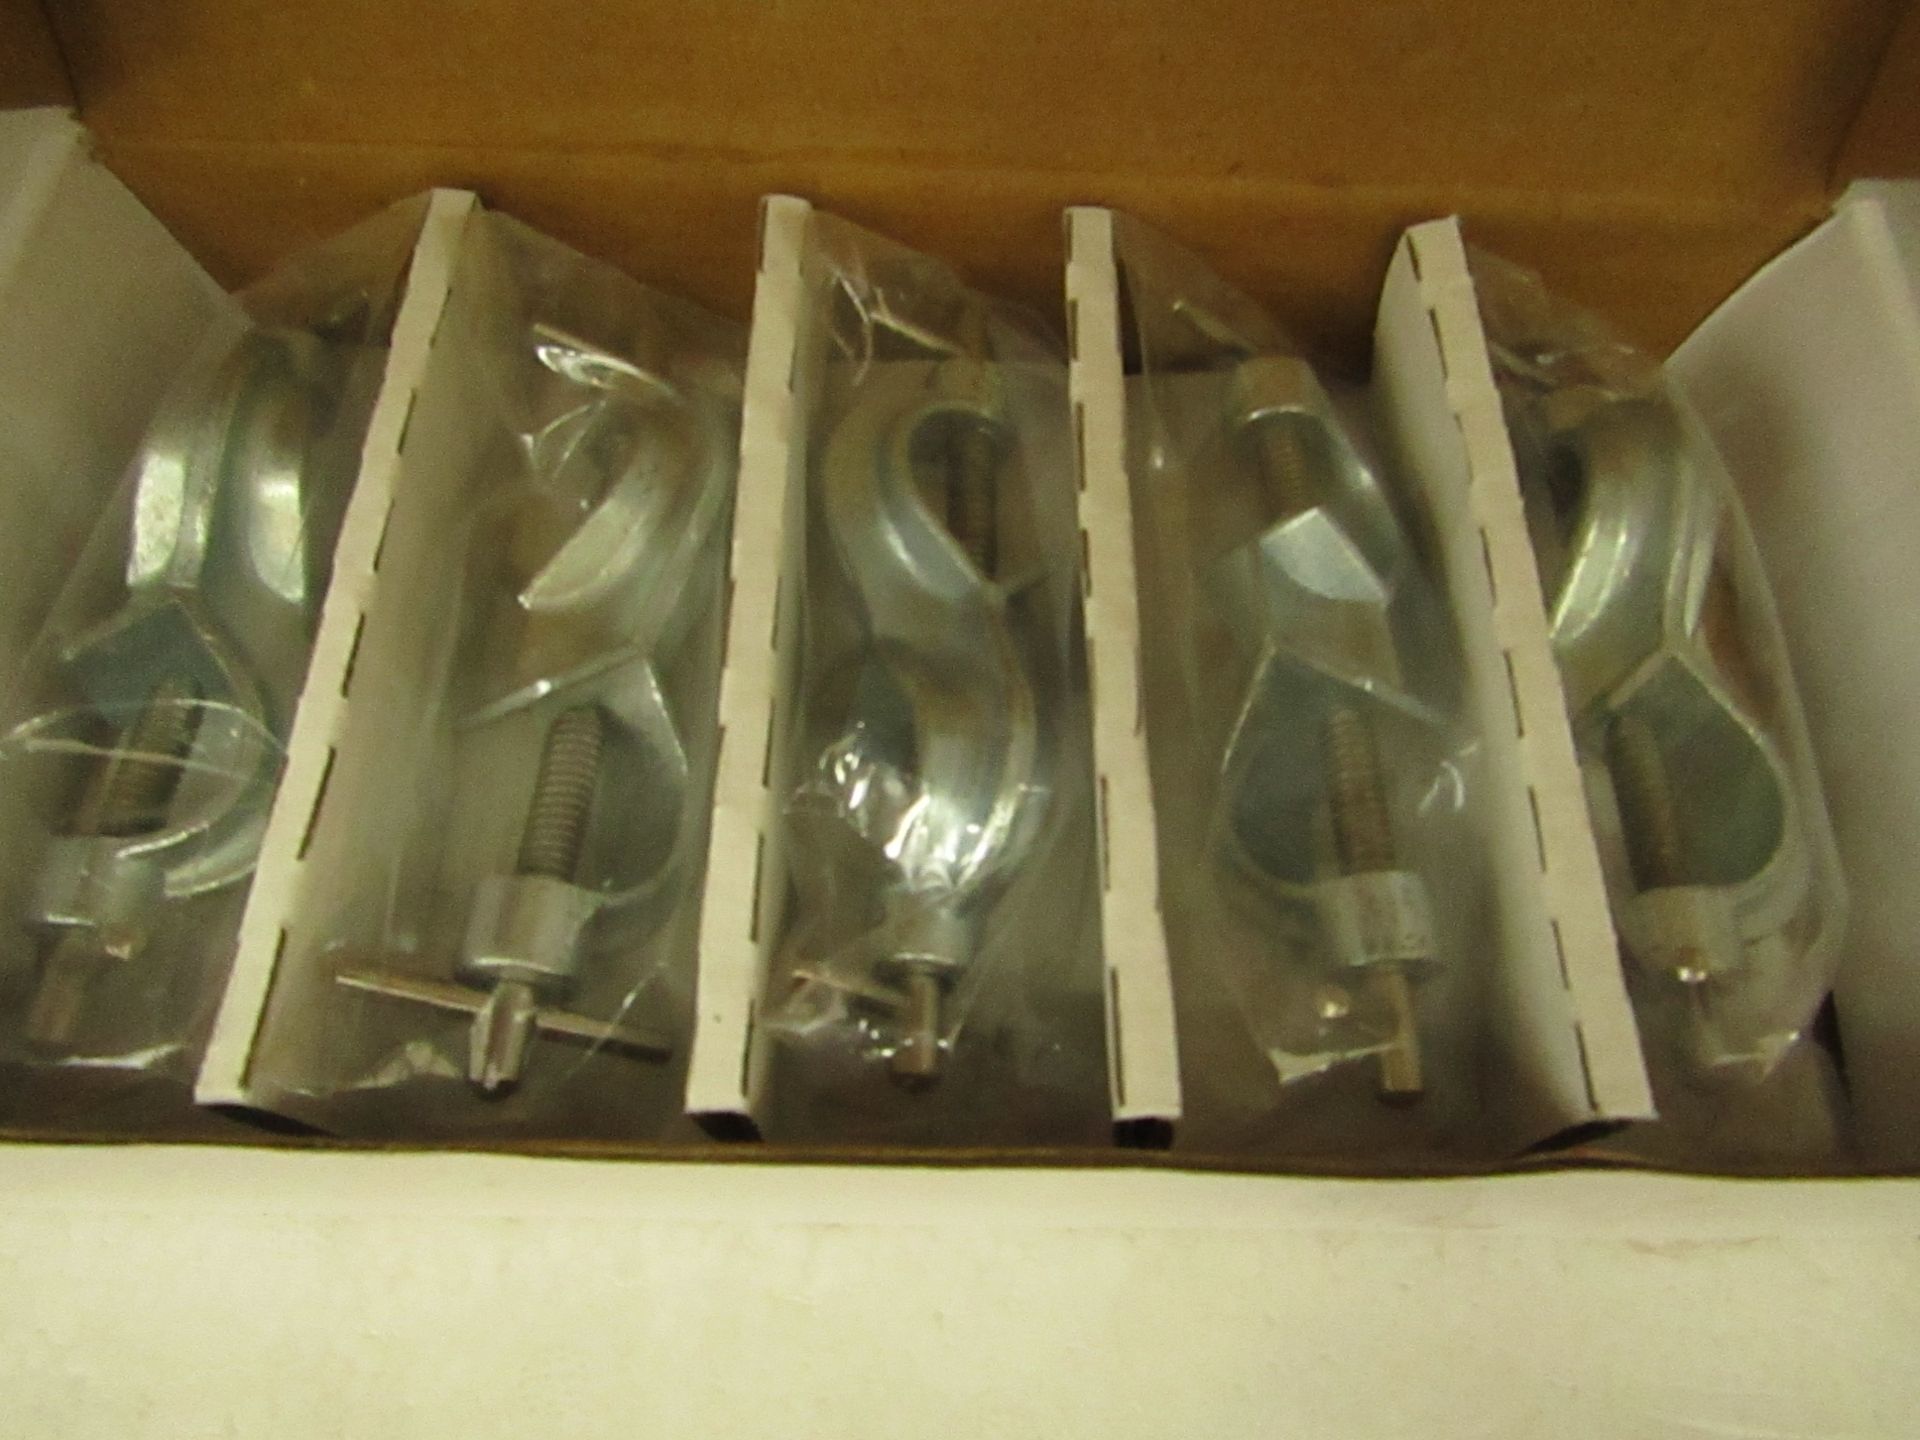 6x Packs of Philip Harris Boss head lab stand clamps, each pack contains 5 clamps. New and boxed. - Image 2 of 2